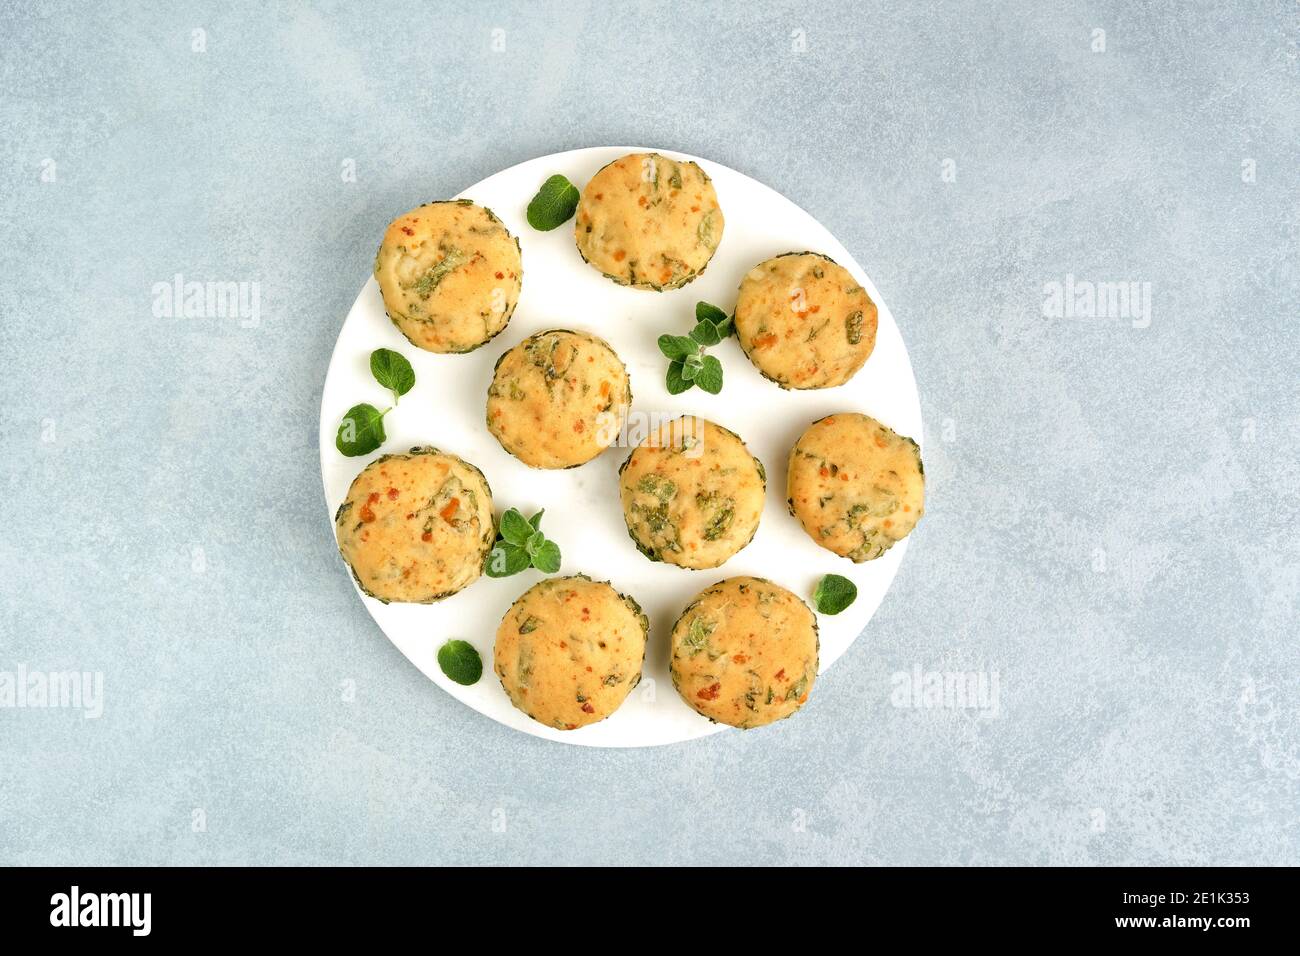 Homemade buns with fresh herbs and cheese. Top view with copy space Stock Photo